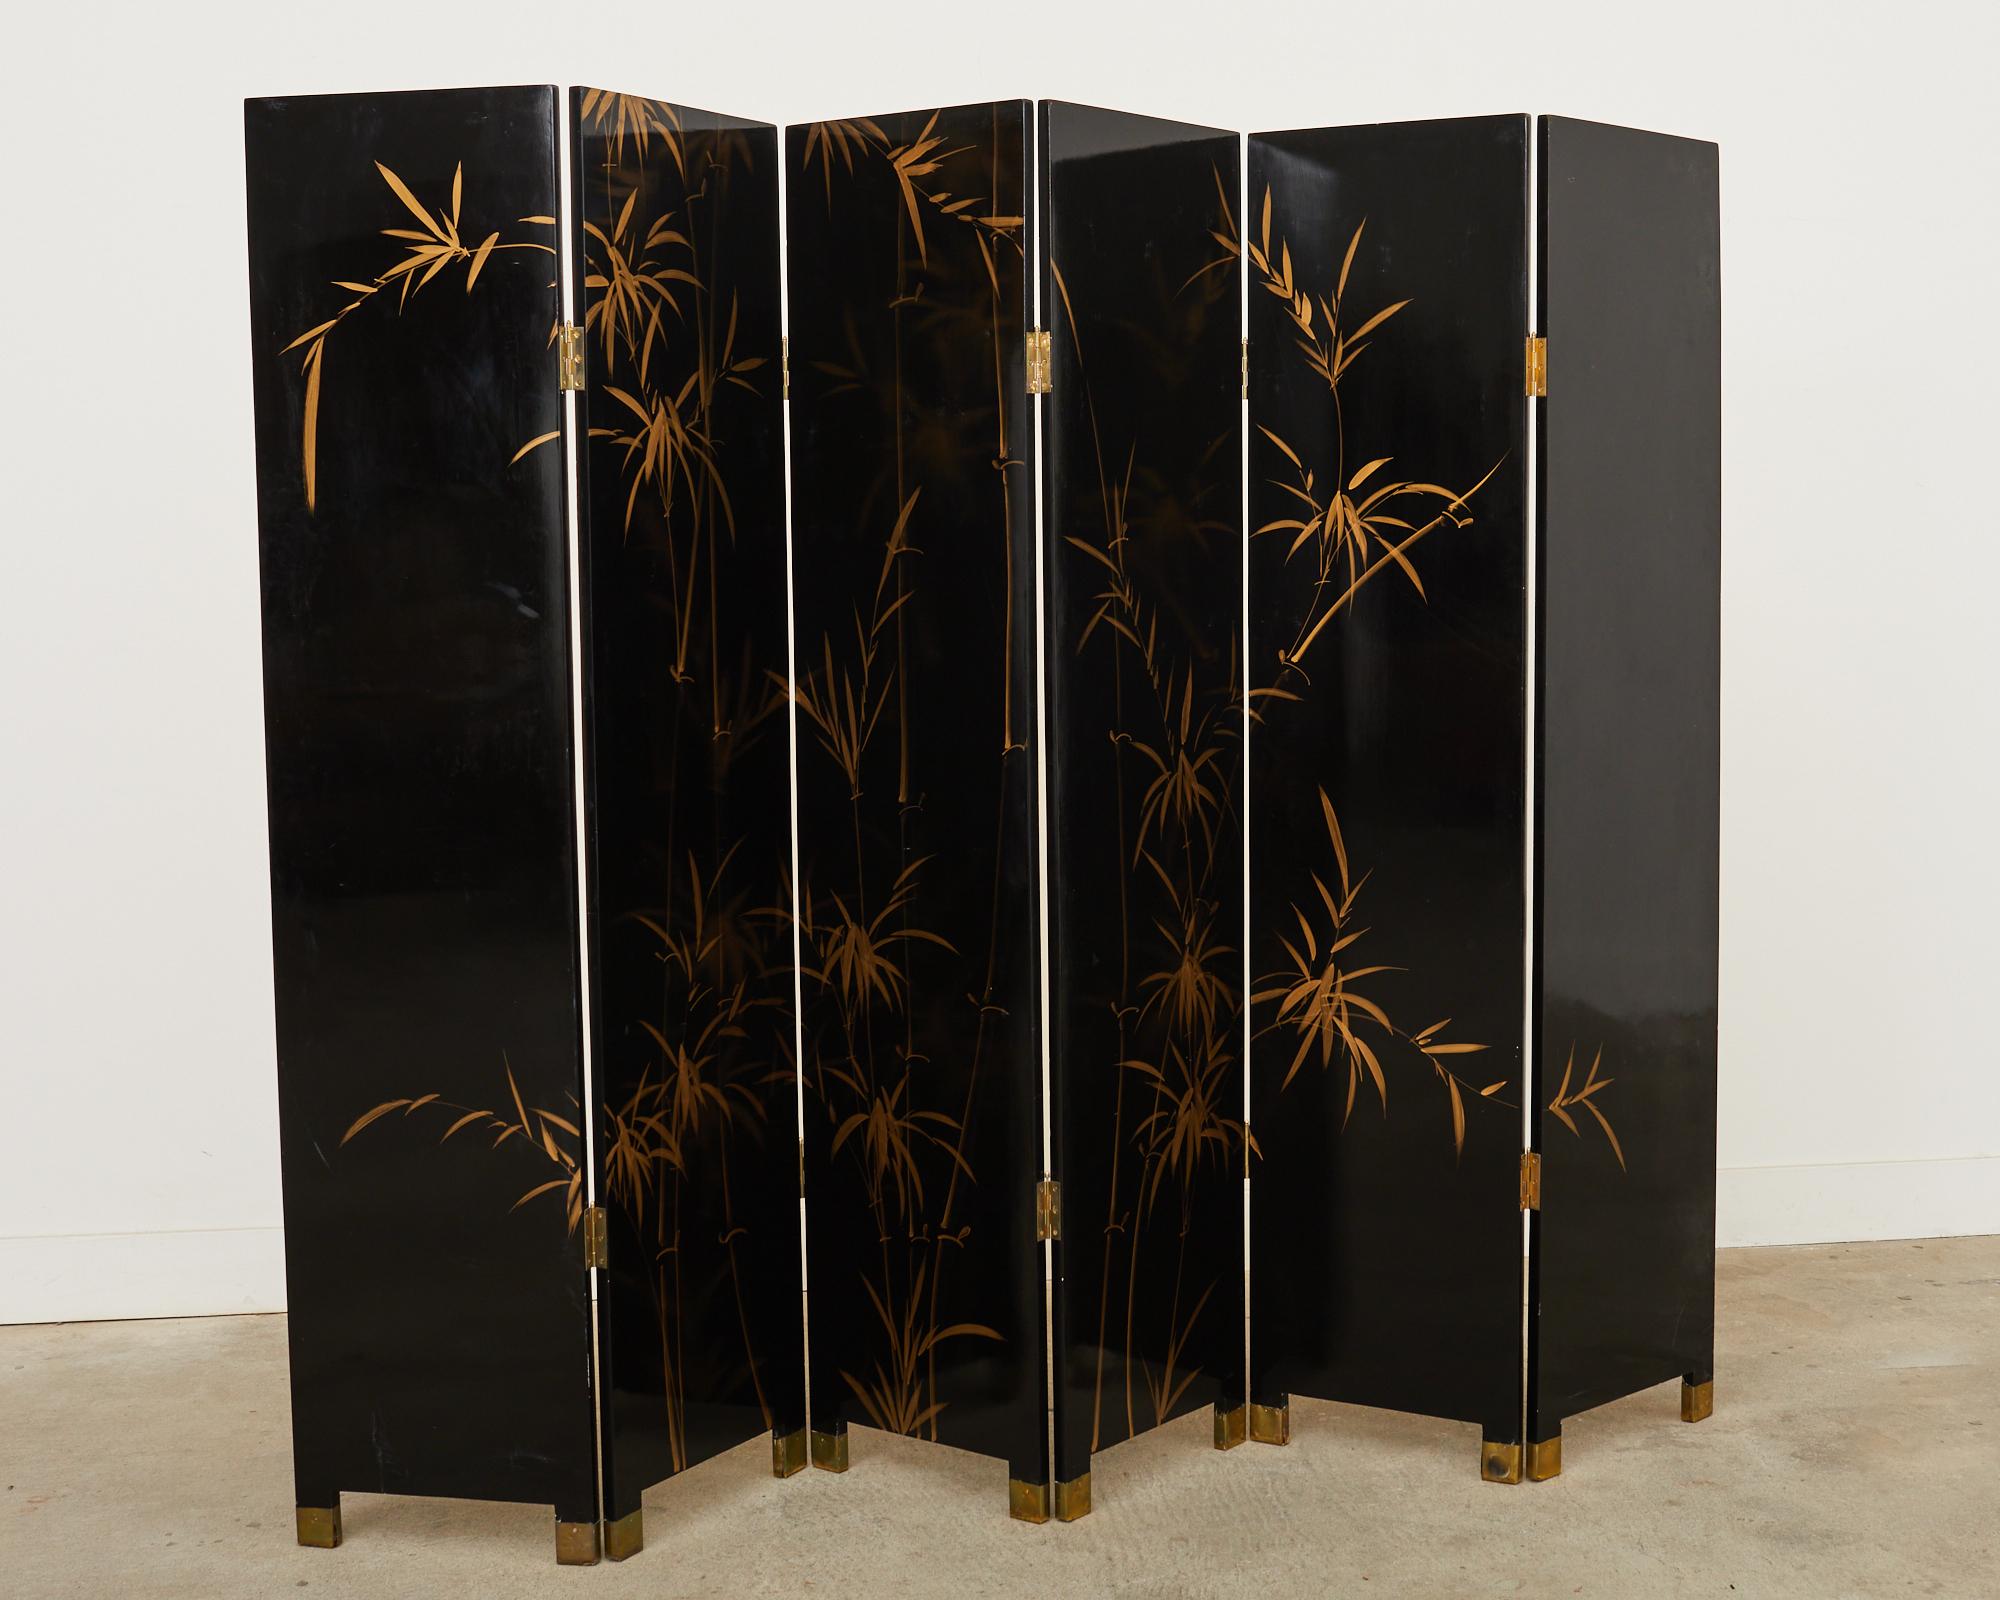 Chinese Export Six Panel Folding Screen Cranes on Gold Leaf 13